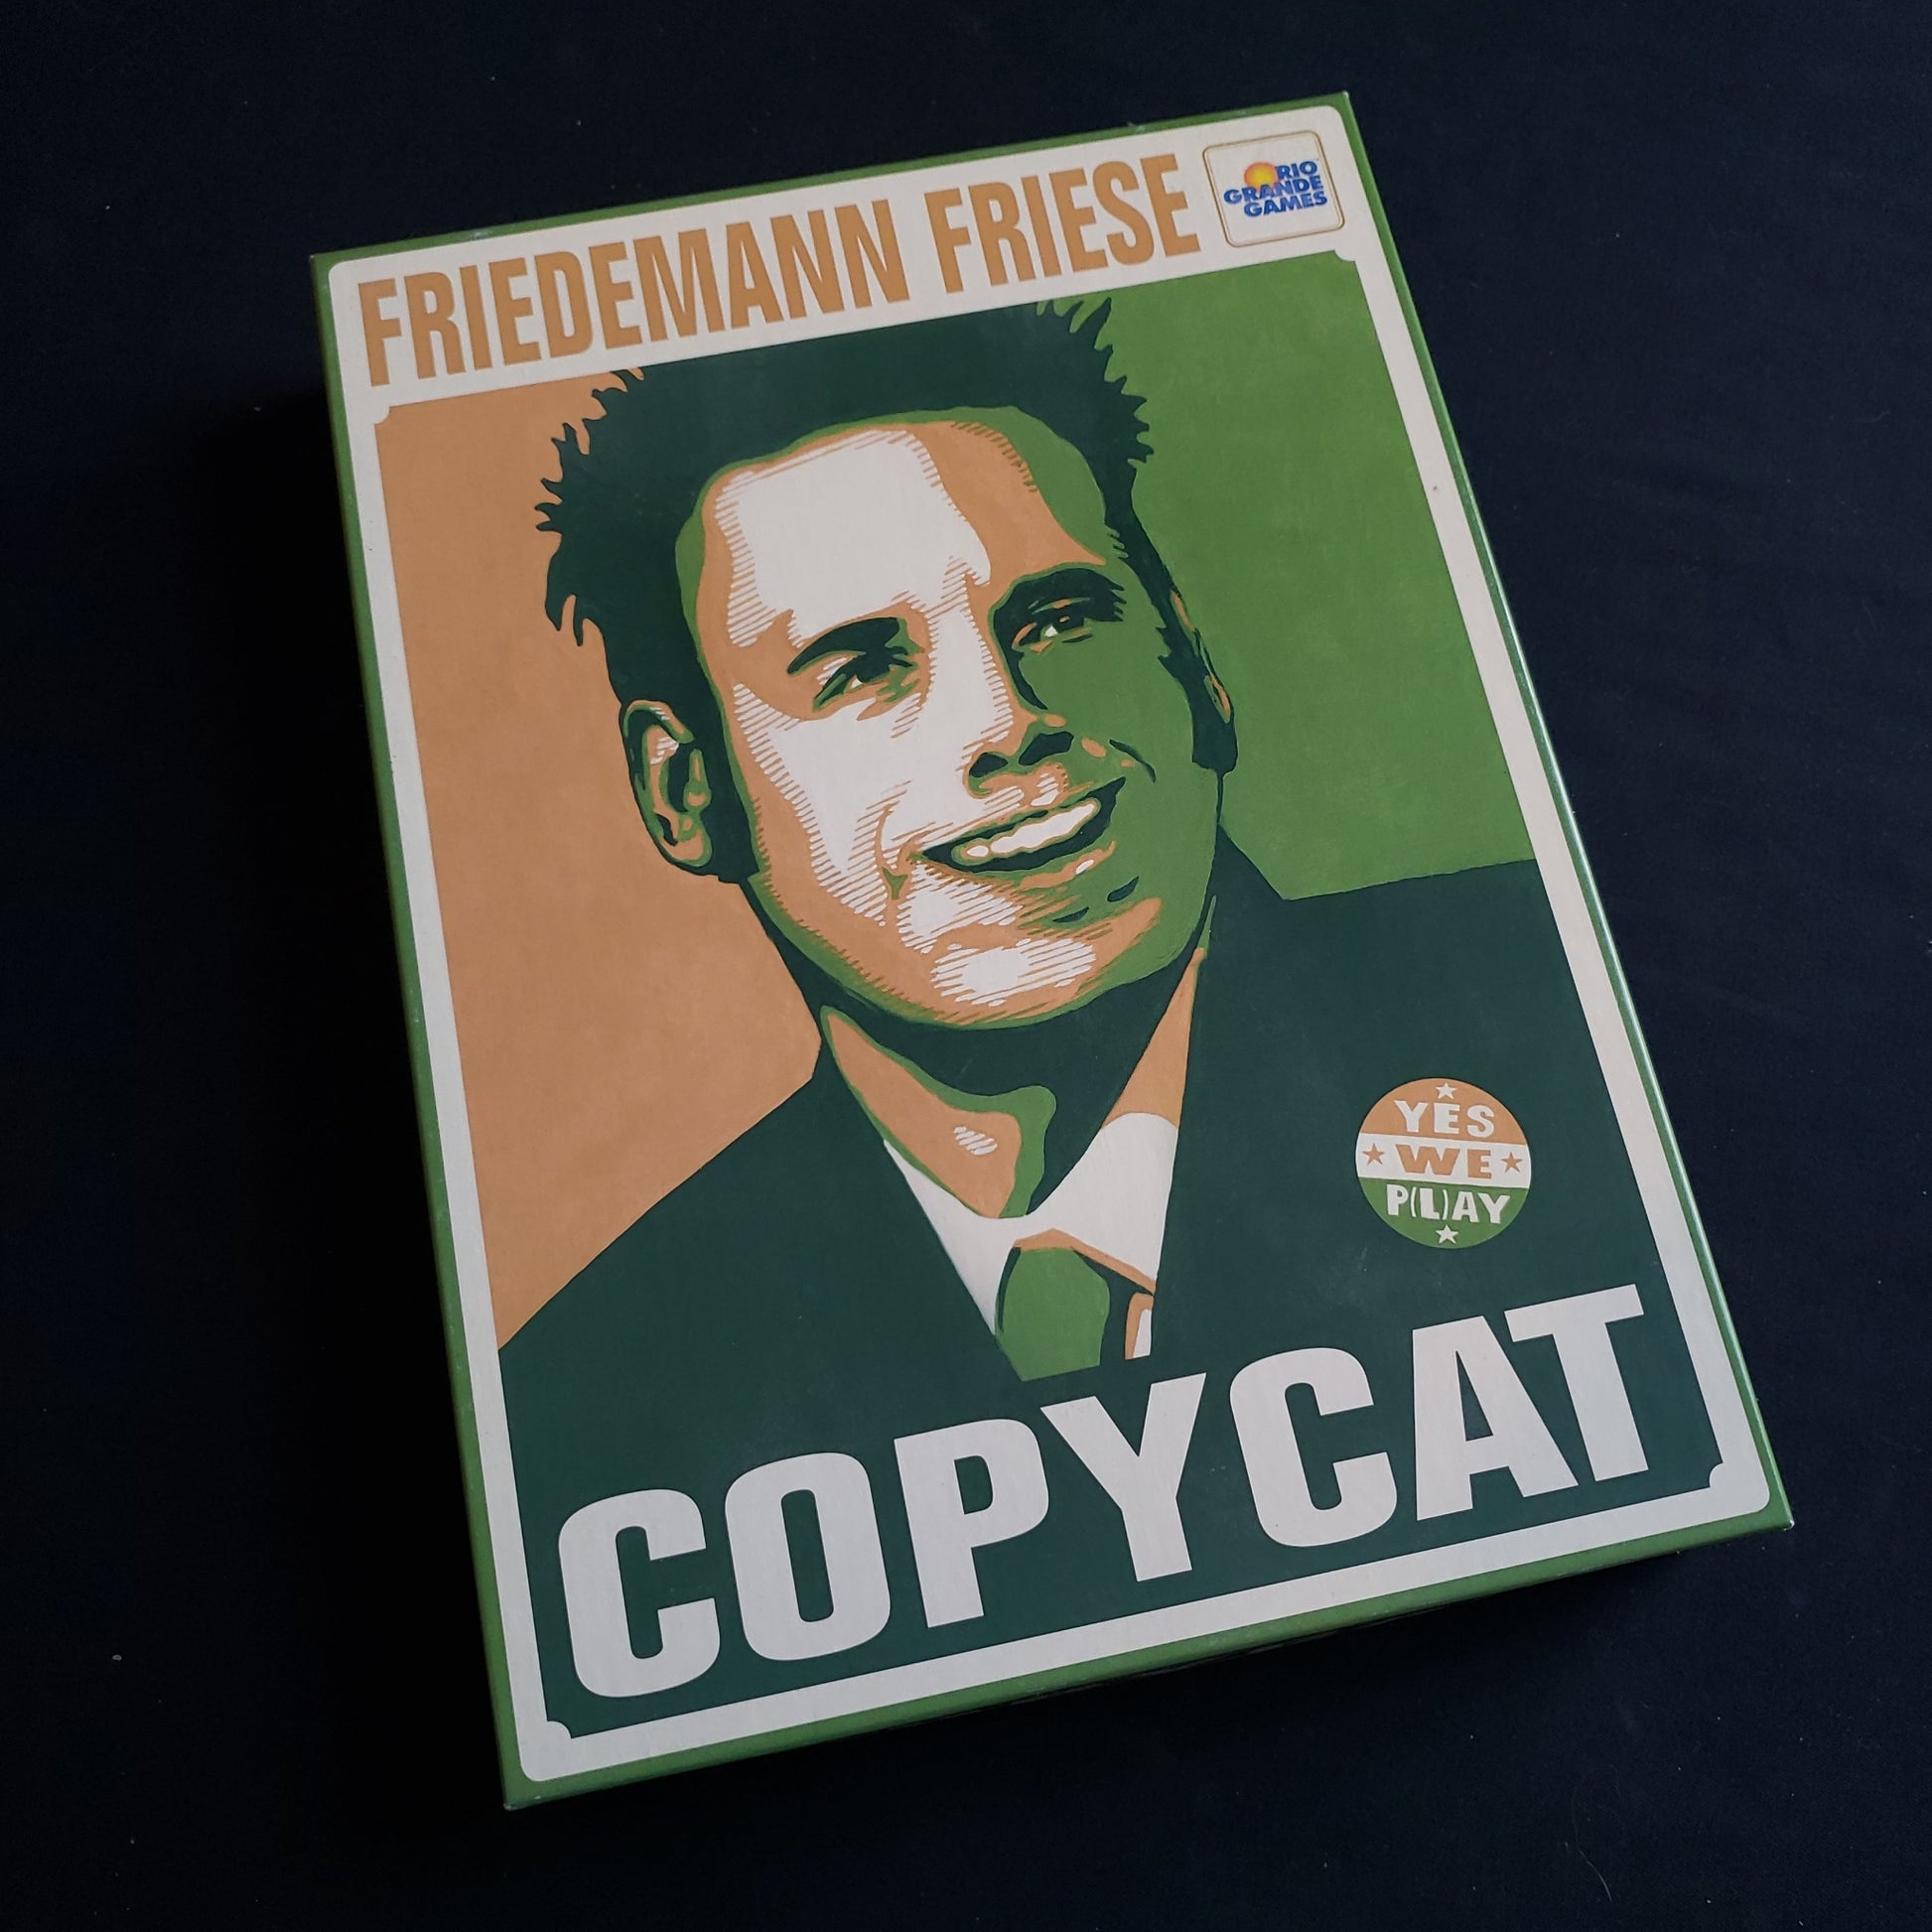 Image shows the front cover of the box of the Copycat board game